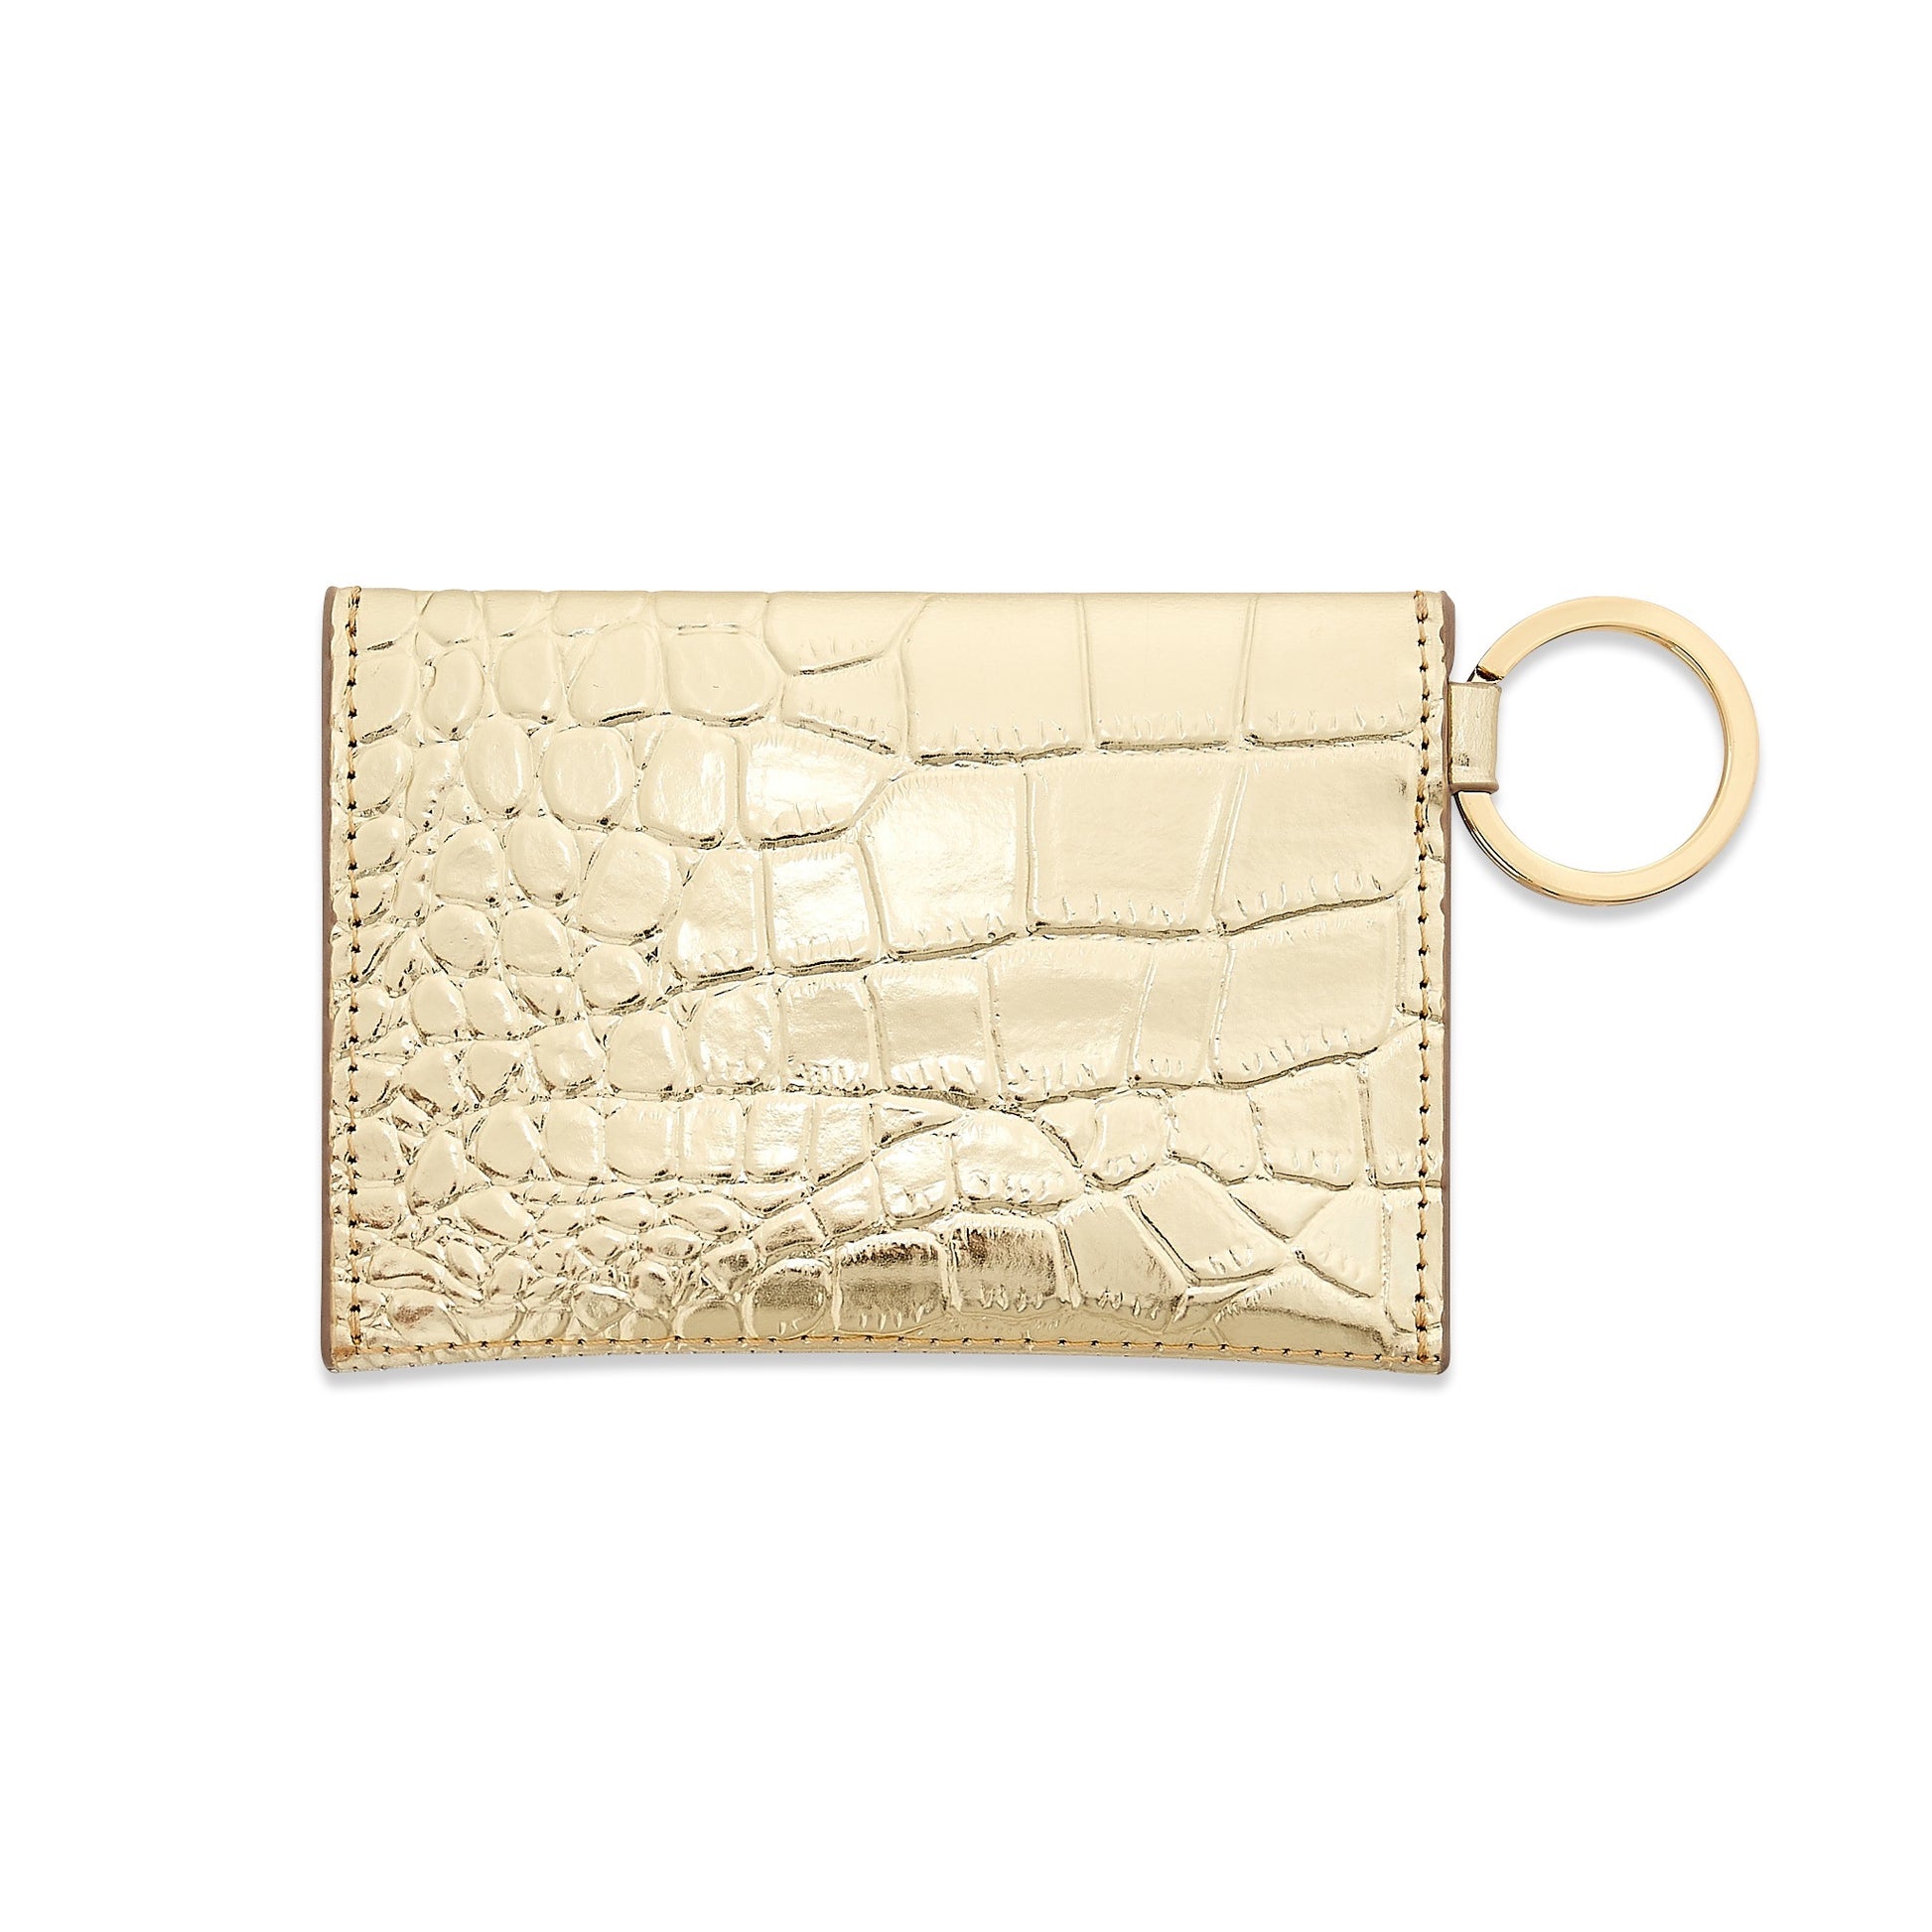 Solid Gold Rush Croc-Embossed - Mini Envelope Wallet by Oventure showing the backside of the gold croc embossed leather.